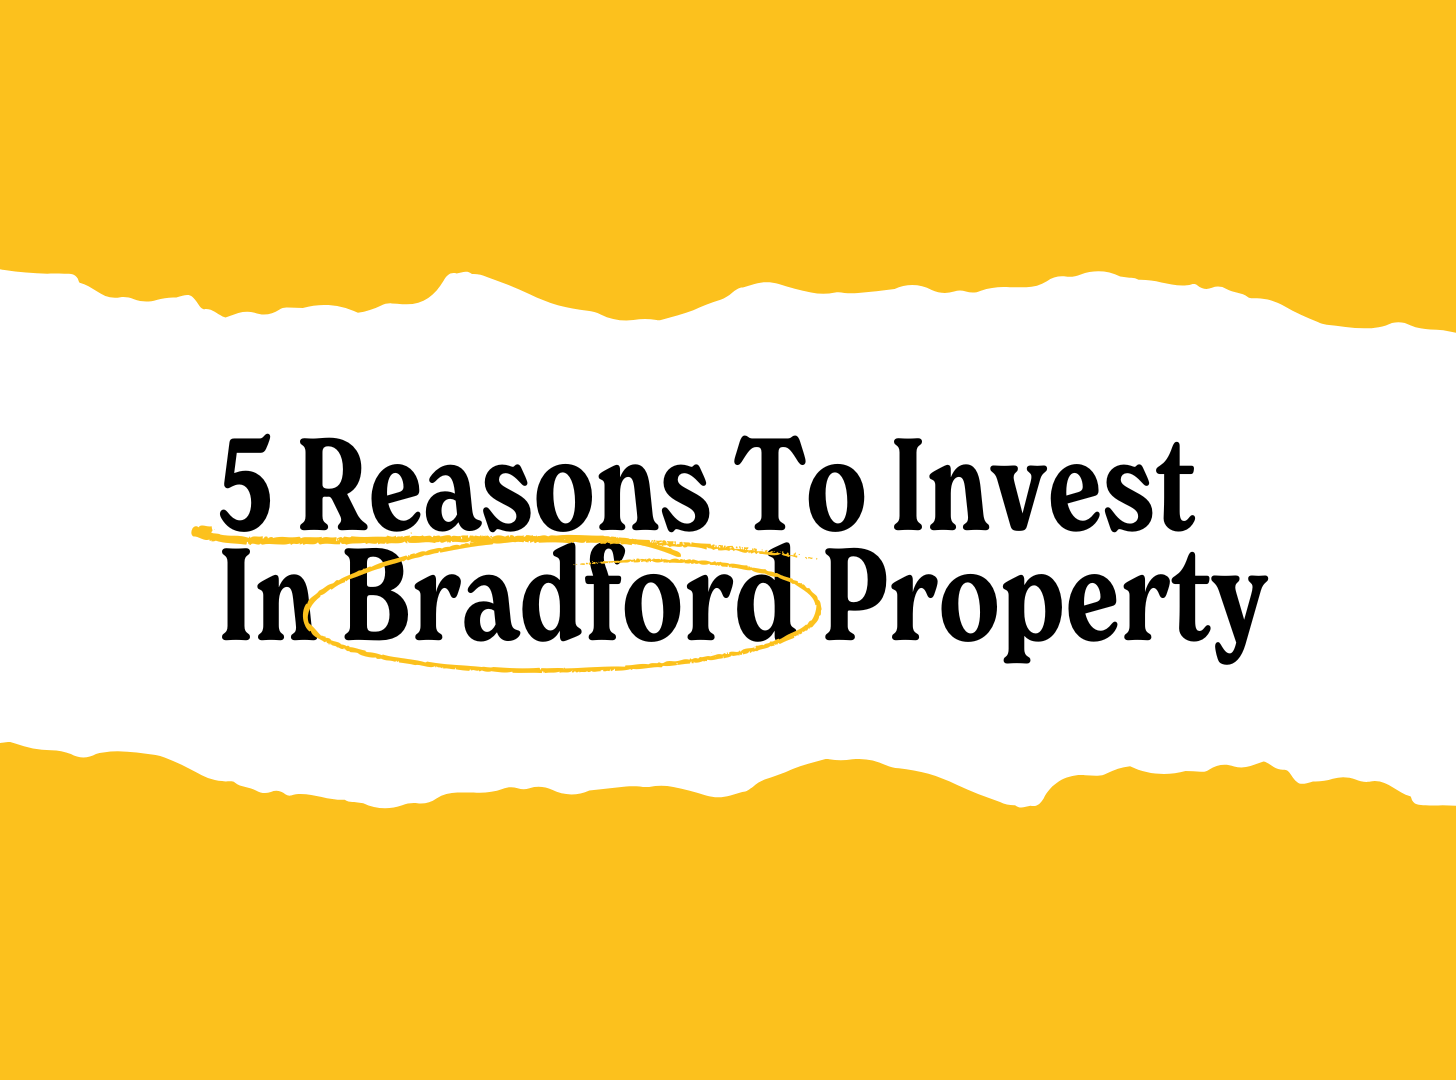 5 Reasons to invest in Bradford Property